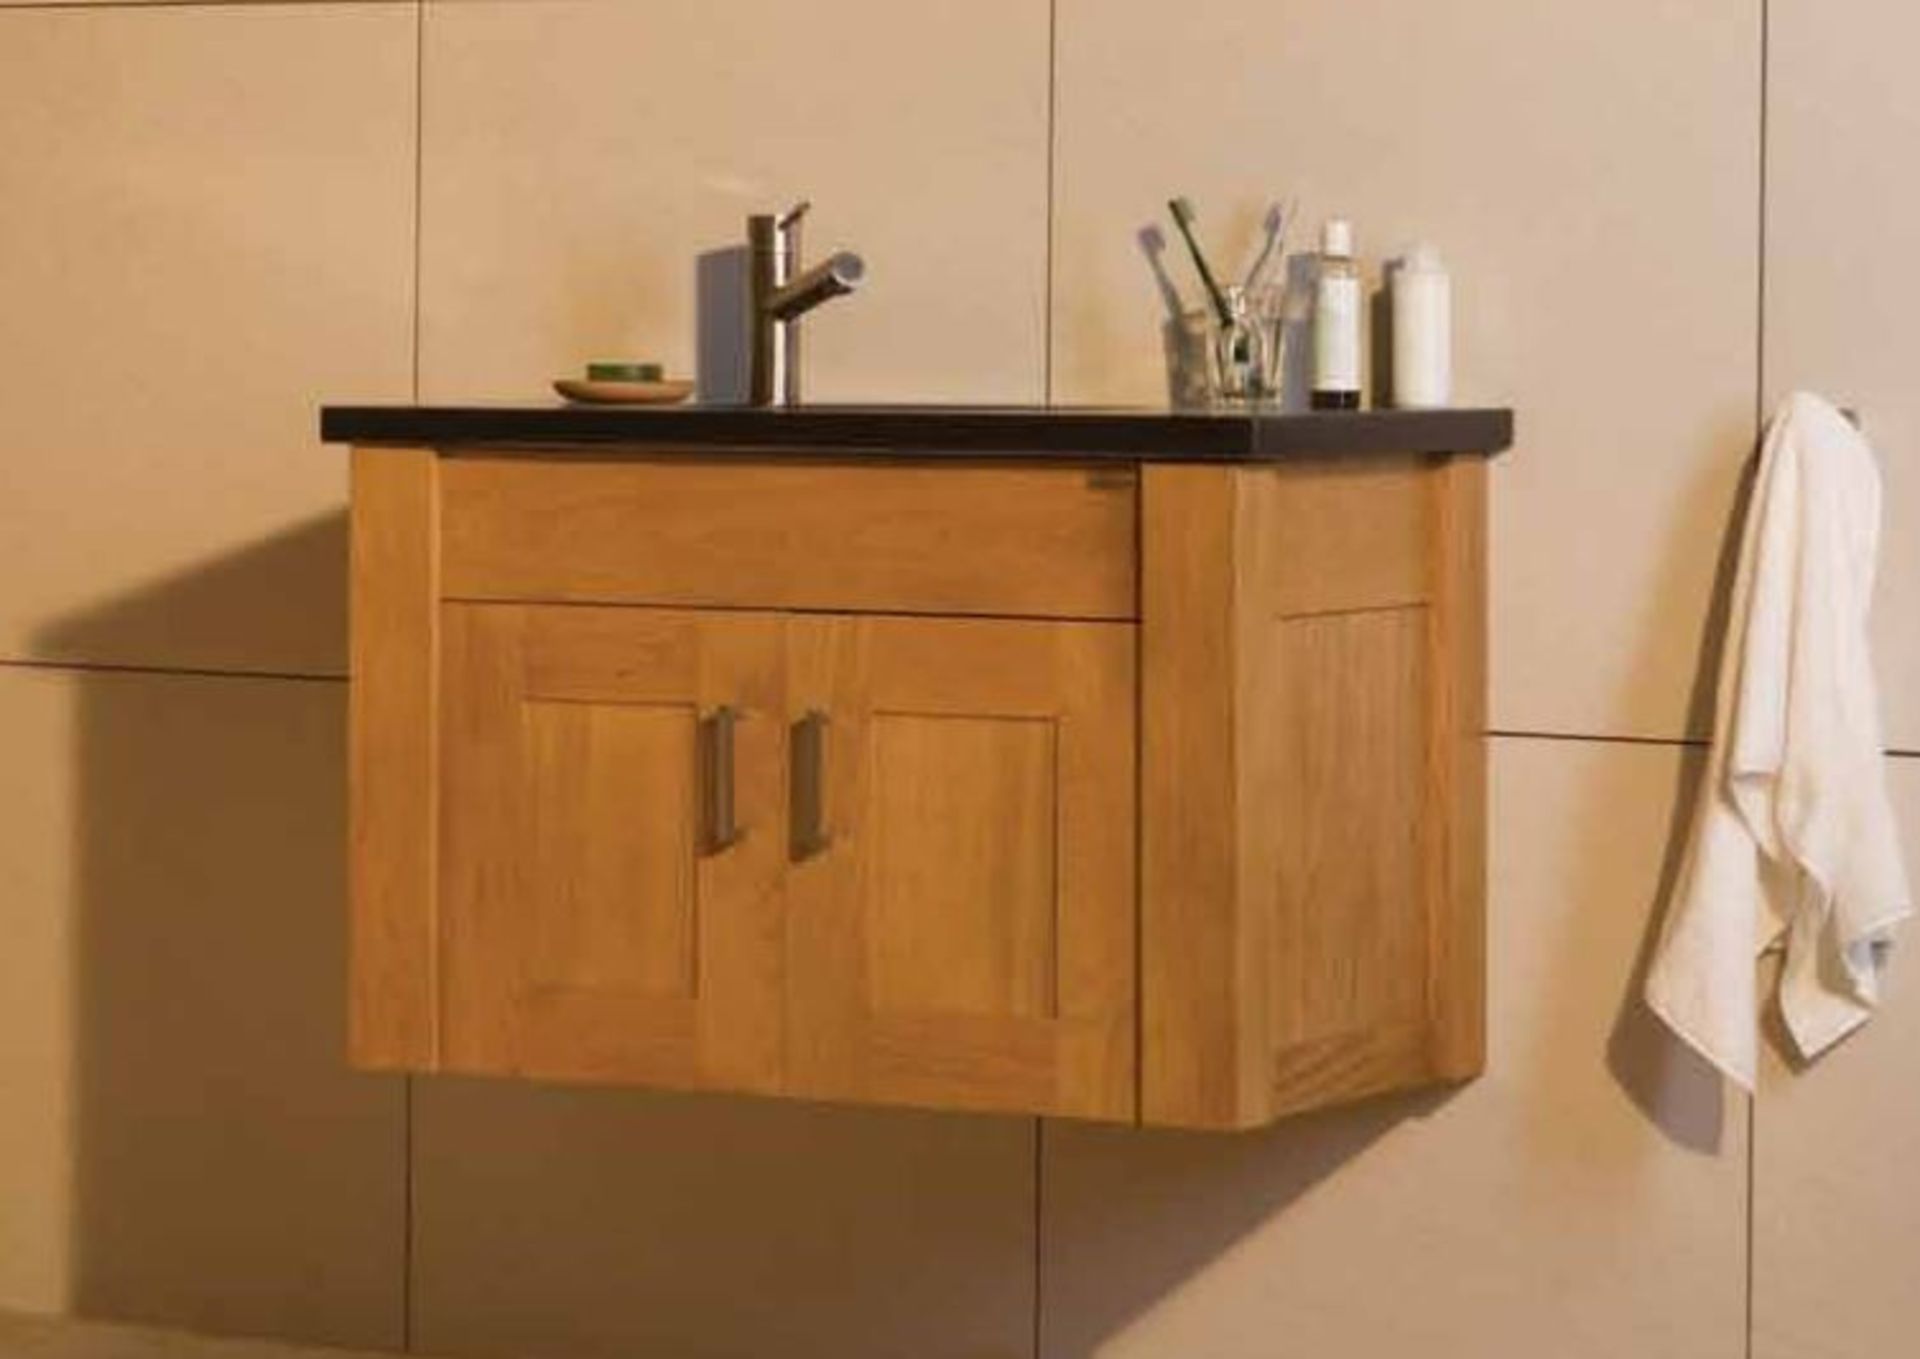 3 x Stonearth 'Entice' Wall Mounted Washstands - American Solid Oak - Original RRP £960 Each - Size: